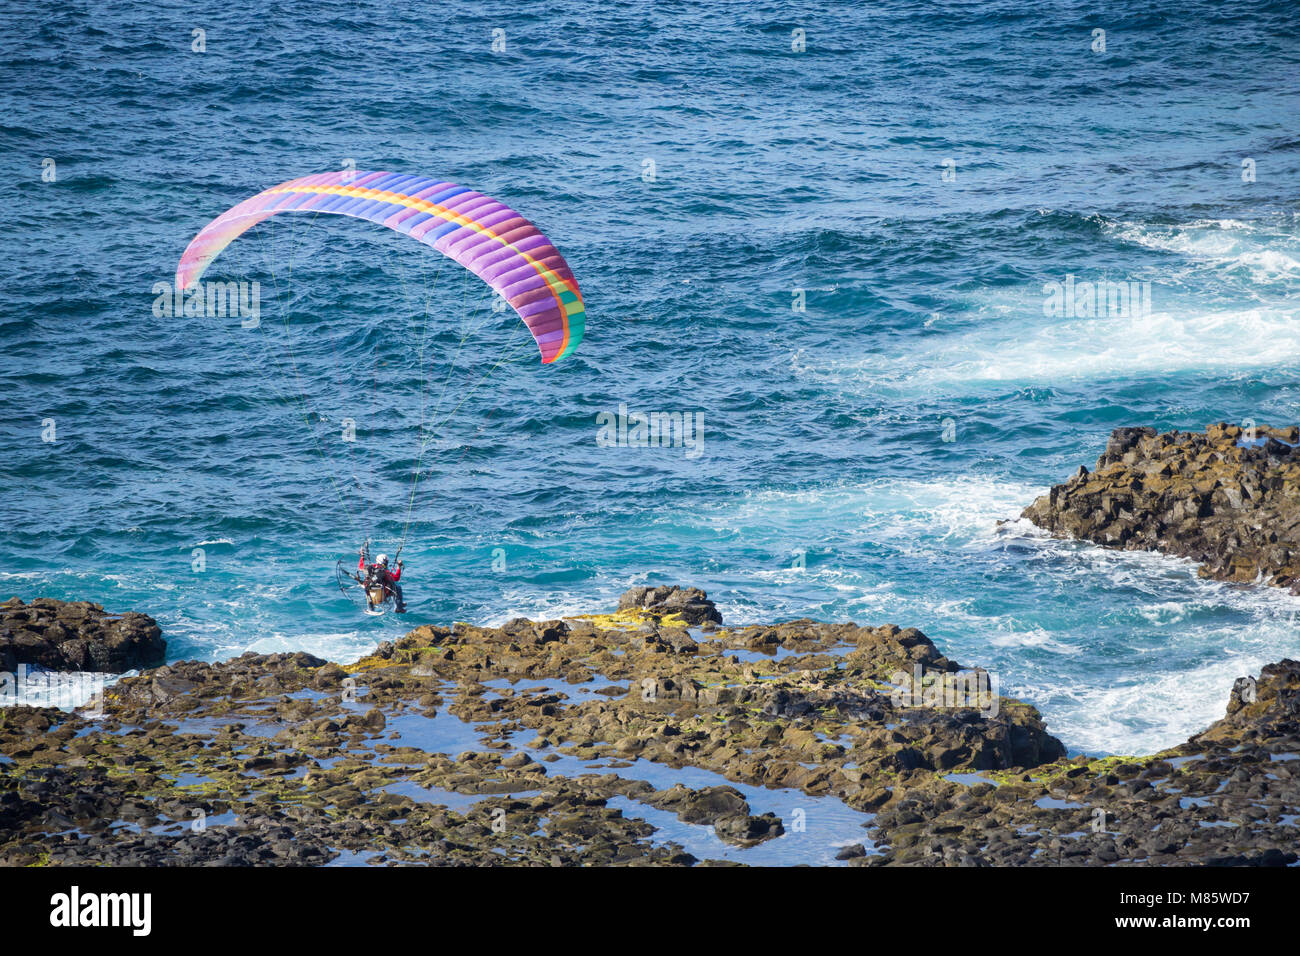 Las Palmas, Gran Canaria, Canary Islands, Spain. 14th March, 2018.  Motorized paraglider flying over the Atlantic ocean from cliff top take off near Las Palmas, the capital of Gran Canaria, in glorious sunshine. Credit: ALAN DAWSON/Alamy Live News Stock Photo